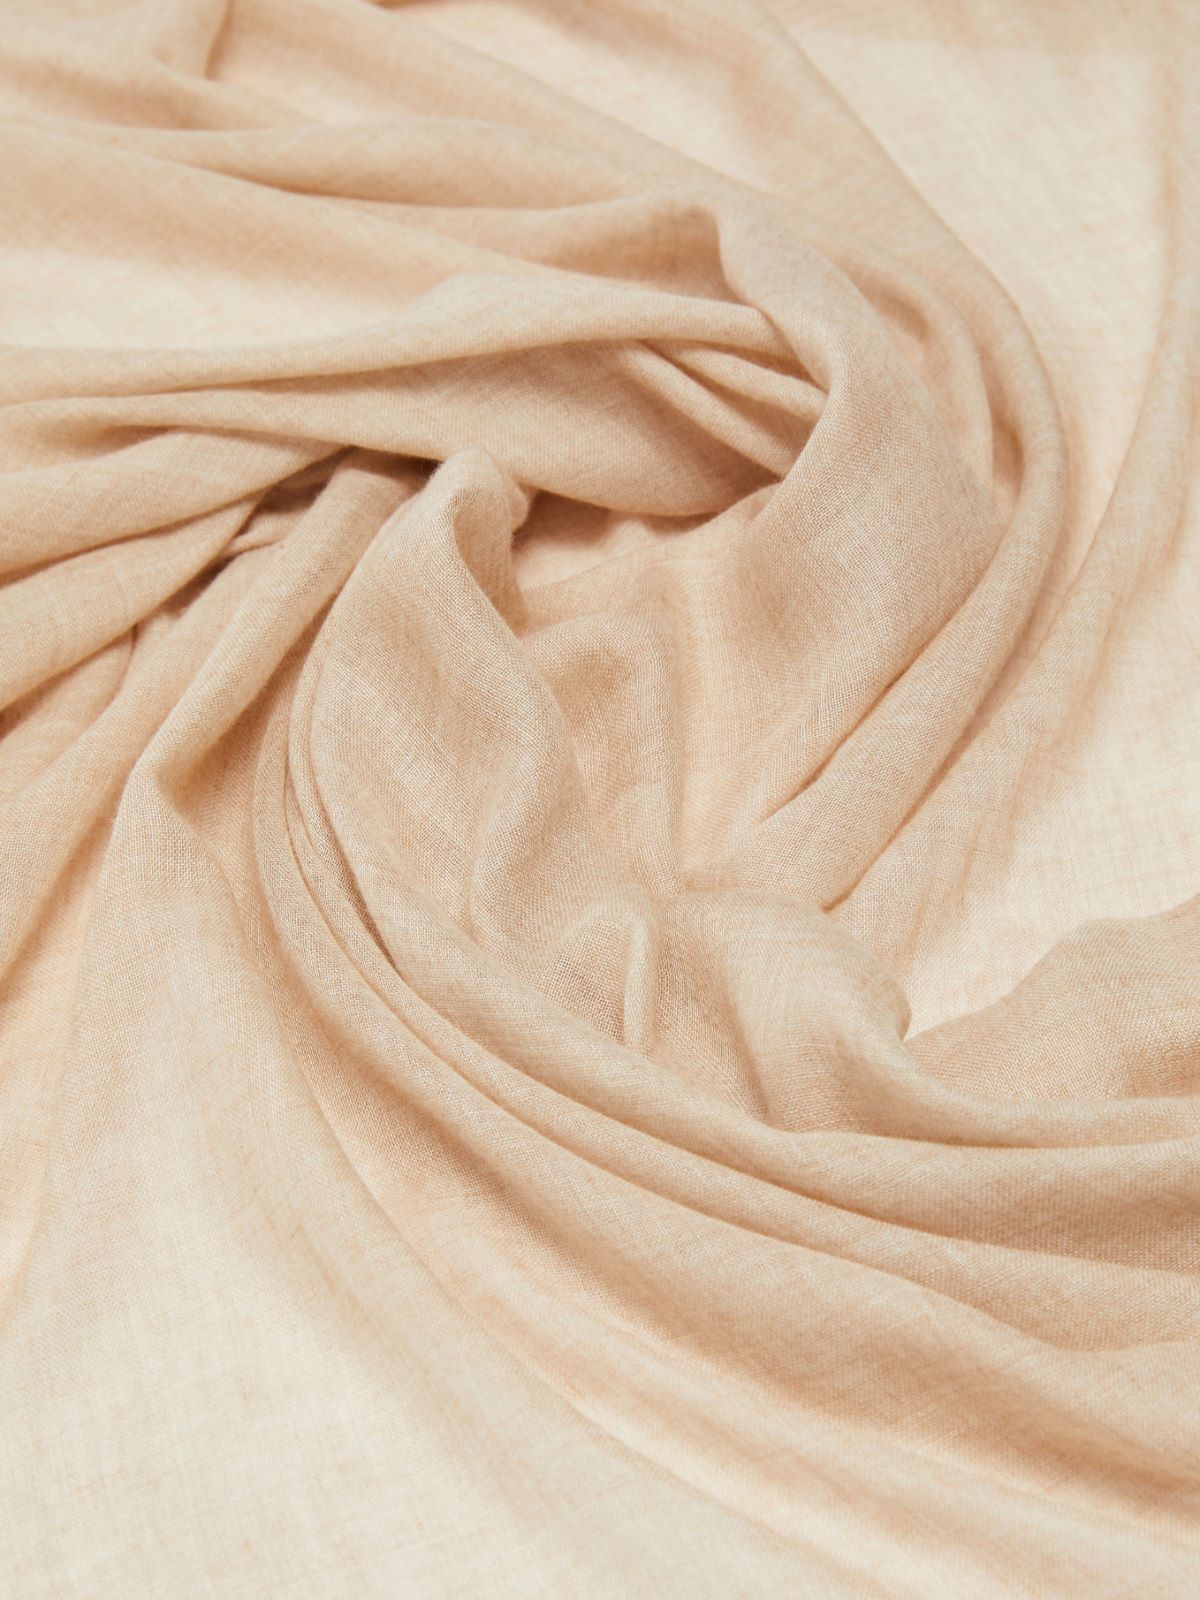 Viscose and cashmere stole - CAMEL - Weekend Max Mara - 3